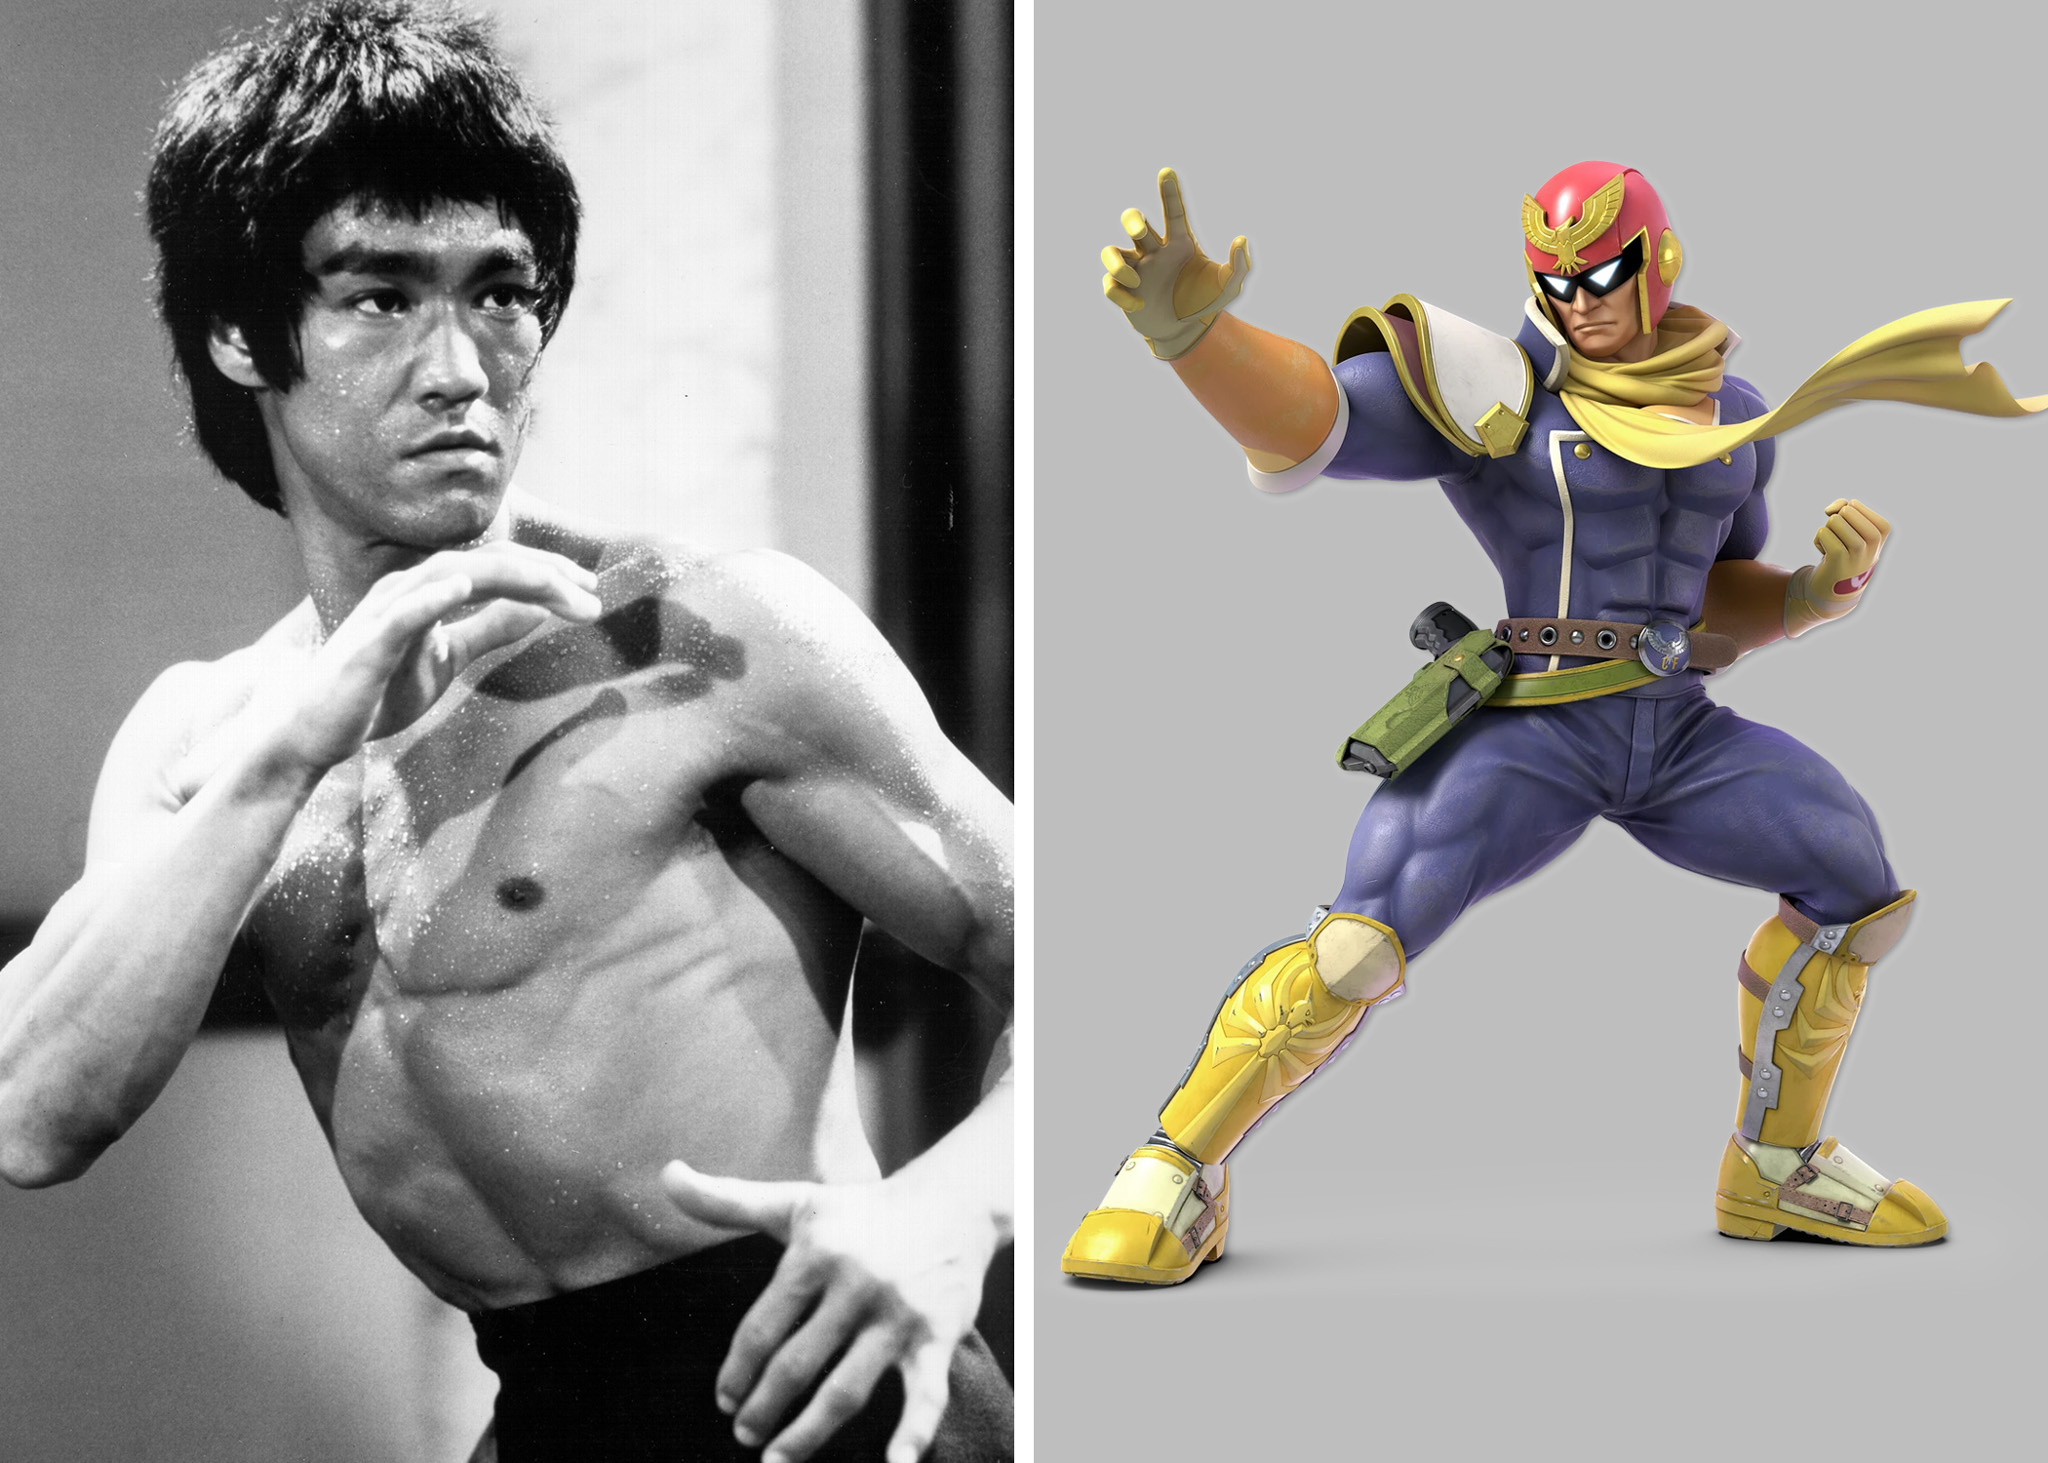 The image is split, showing a shirtless man in a martial arts pose on the left and a muscular superhero in a blue and yellow costume on the right.